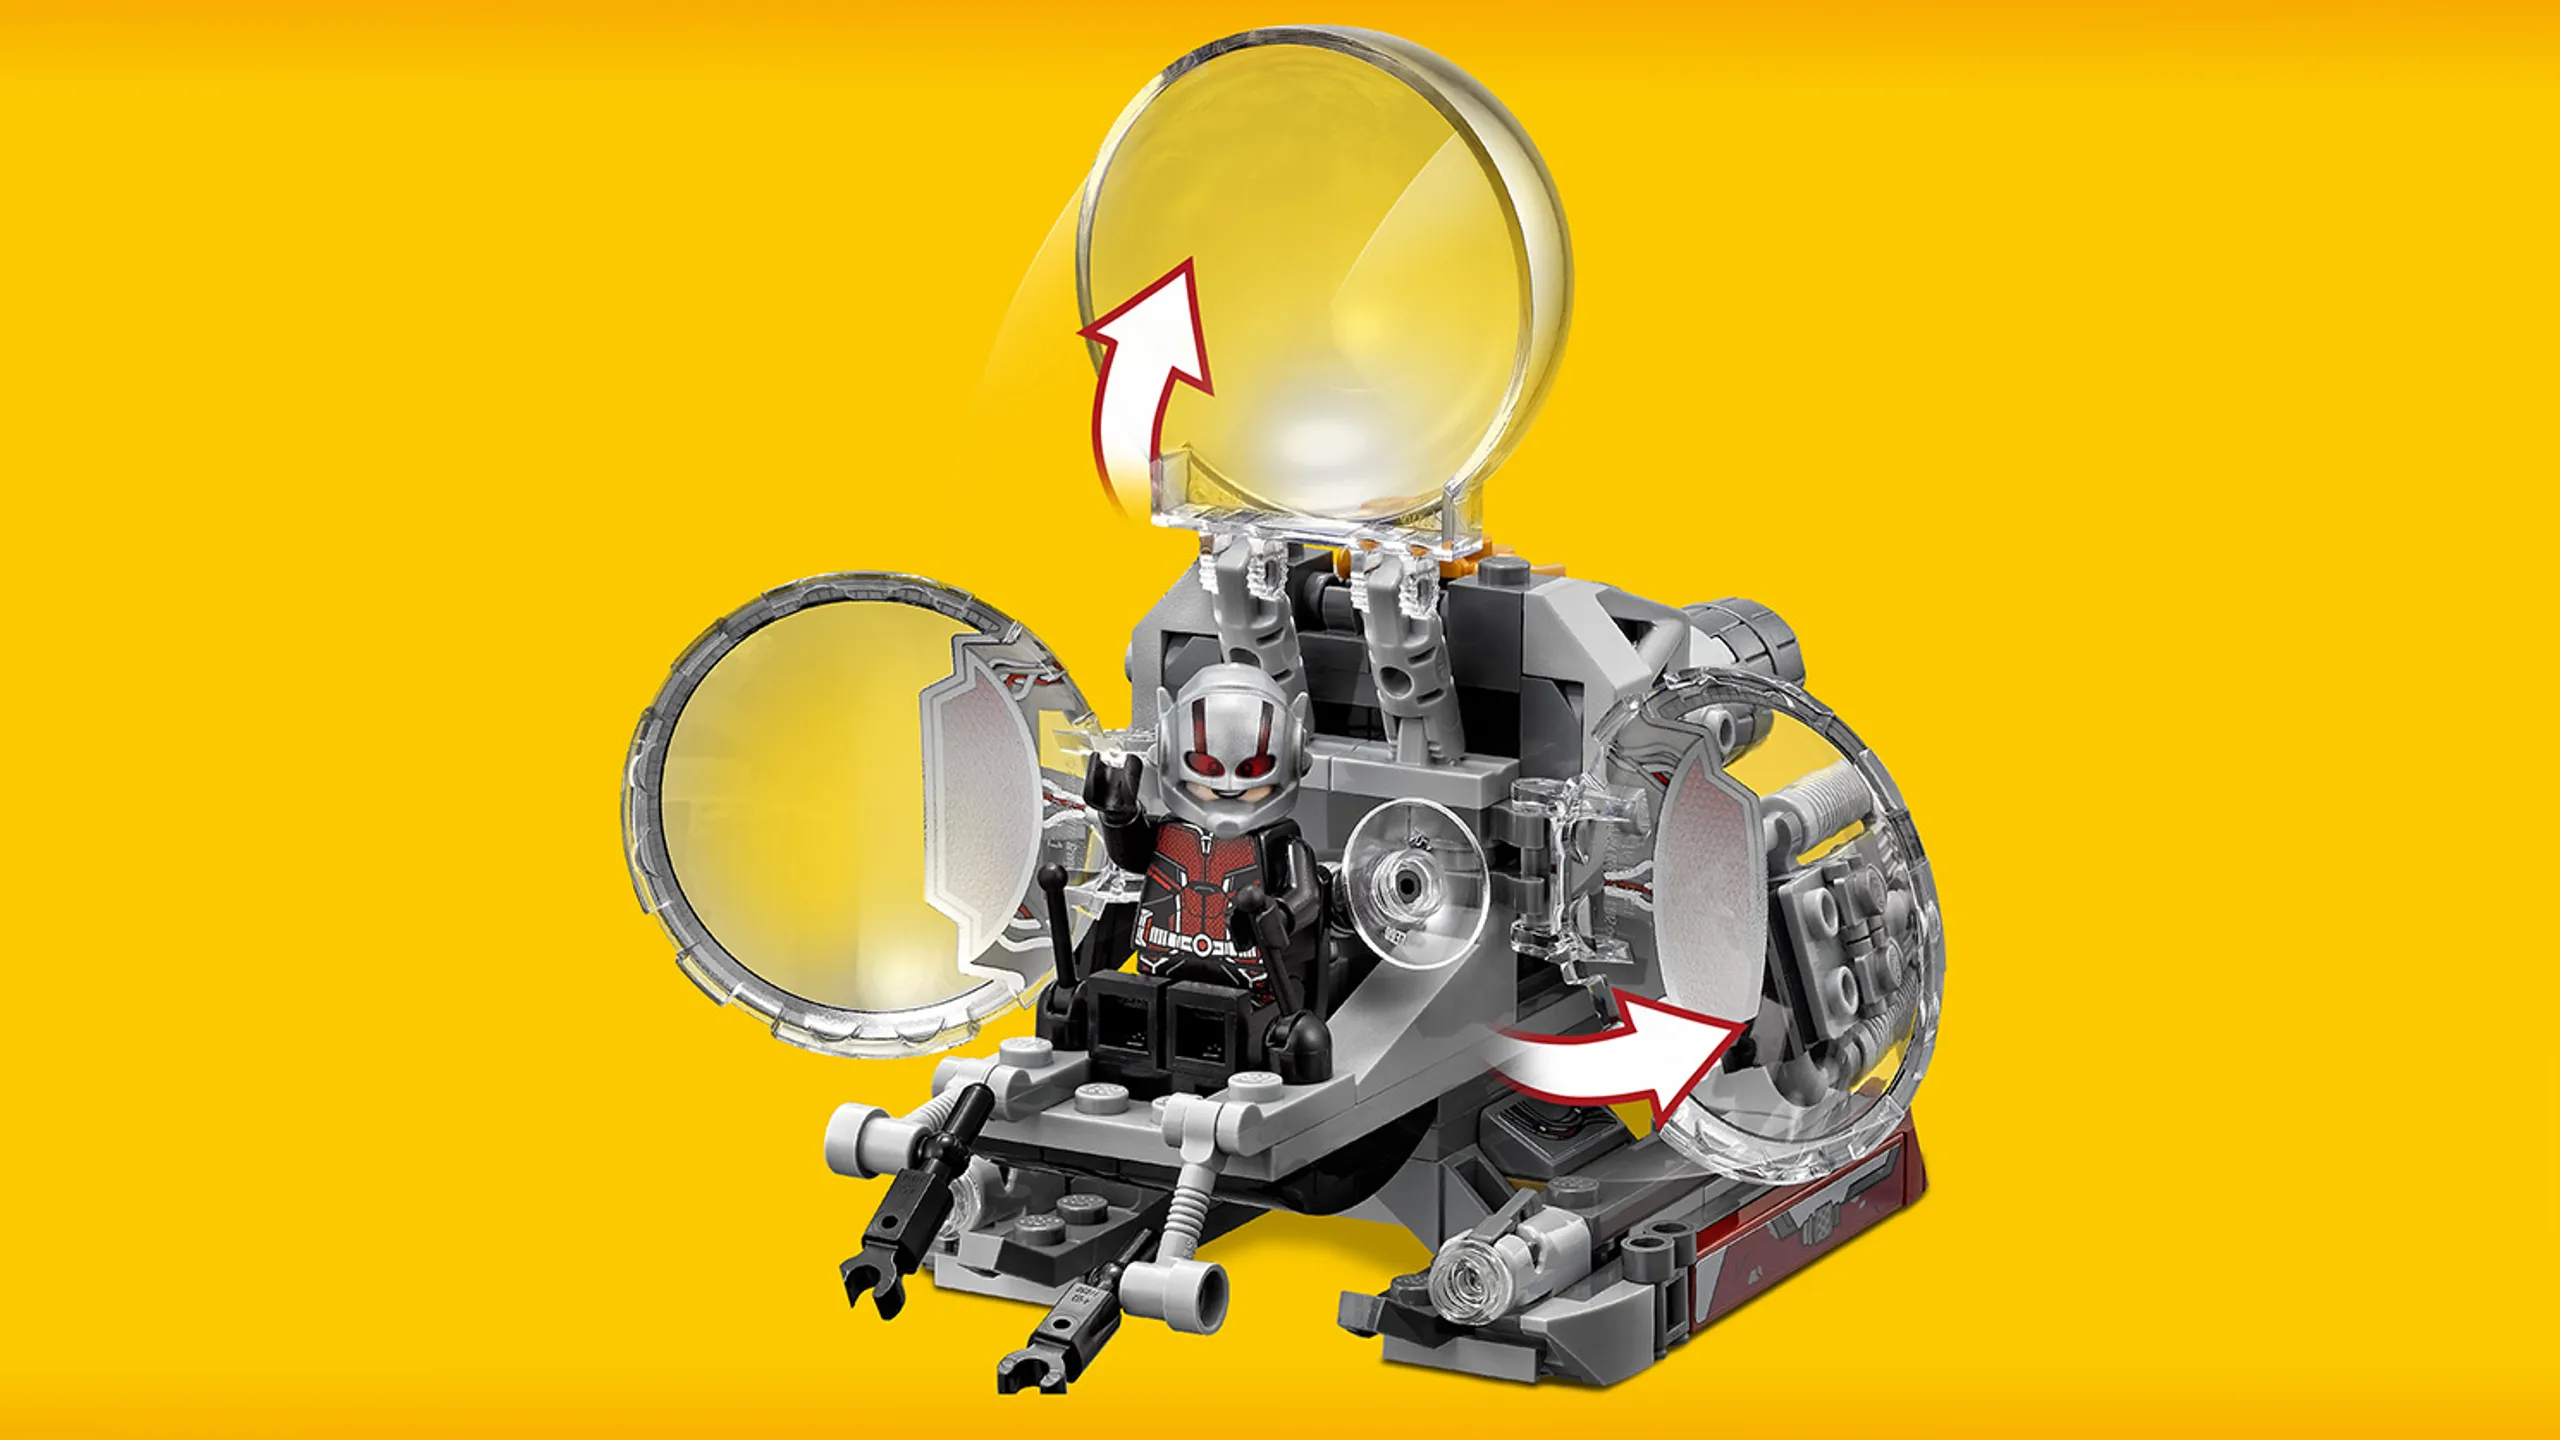 LEGO Super Heroes - 76109 Quantum Realm Explorers - Open the cockpit of the Quantum Vehicle and place Ant Man in it.